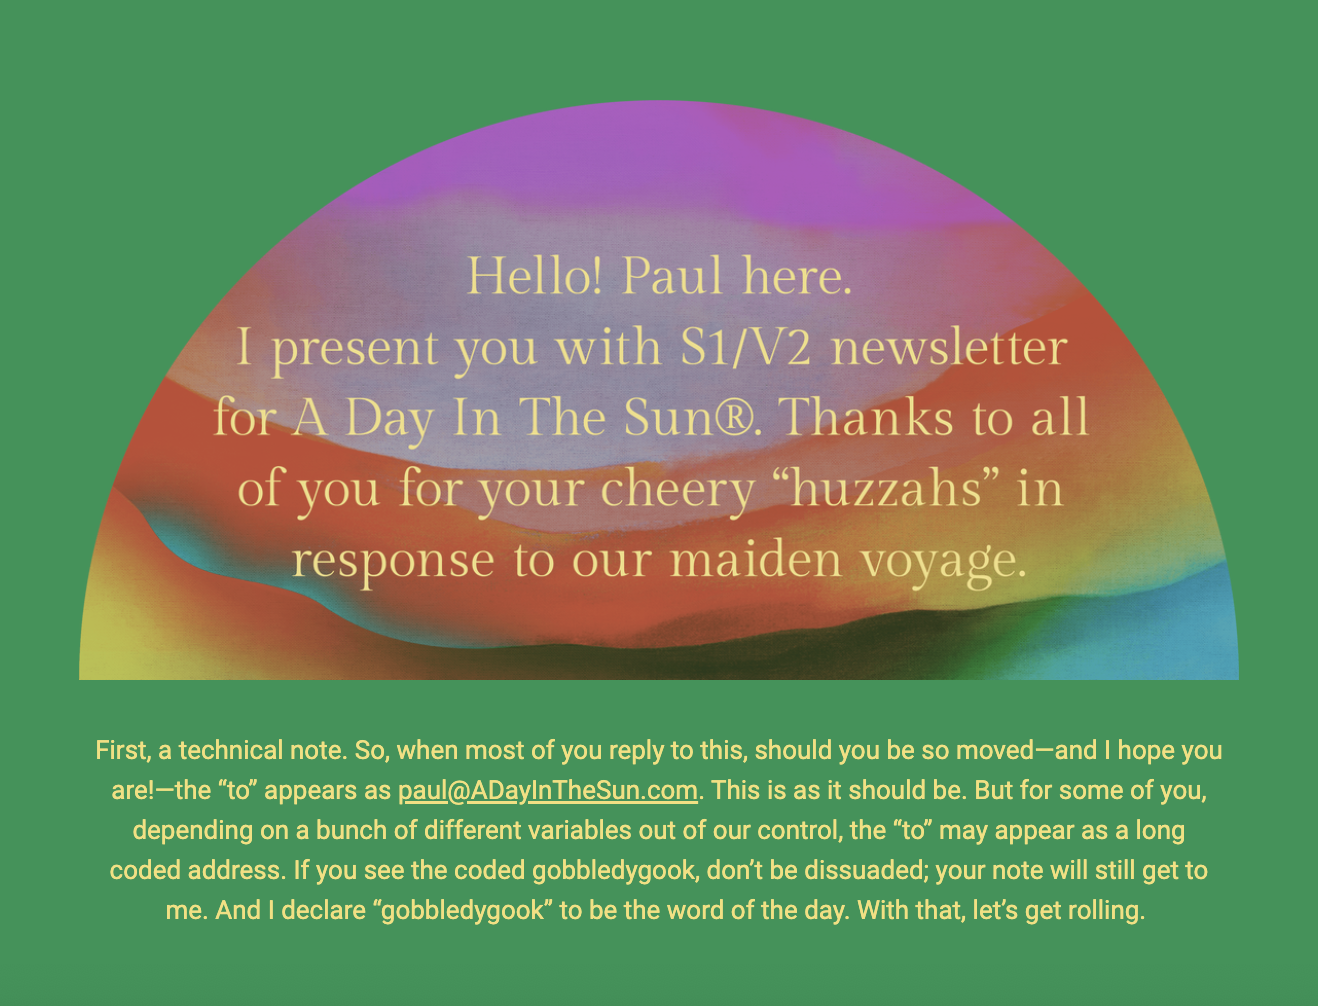 The image features a greeting from Paul, who introduces the S1/V2 newsletter for "A Day In The Sun®." It expresses gratitude for the positive reactions received. The background of the image is an abstract design with a rainbow of blended colors creating an arch, symbolizing optimism and diversity.

Below the greeting, there is a technical note about email responses. It explains that while most replies will show the correct email address (paul@ADayInTheSun.com), some may see a long, coded string due to variables outside of their control. The writer encourages not to be dissuaded by this "gobbledygook" and assures that the message will still be received. The writer signs off with a whimsical declaration that "gobbledygook" is the word of the day and indicates readiness to proceed with the content.

The text within the image reads:
"Hello! Paul here.
I present you with S1/V2 newsletter for A Day In The Sun®. Thanks to all of you for your cheery “huzzahs” in response to our maiden voyage.

First, a technical note. So, when most of you reply to this, should you be so moved—and I hope you are!—the “to” appears as paul@ADayInTheSun.com. This is as it should be. But for some of you, depending on a bunch of different variables out of our control, the “to” may appear as a long coded address. If you see the coded gobbledygook, don’t be dissuaded; your note will still get to me. And I declare “gobbledygook” to be the word of the day. With that, let’s get rolling."